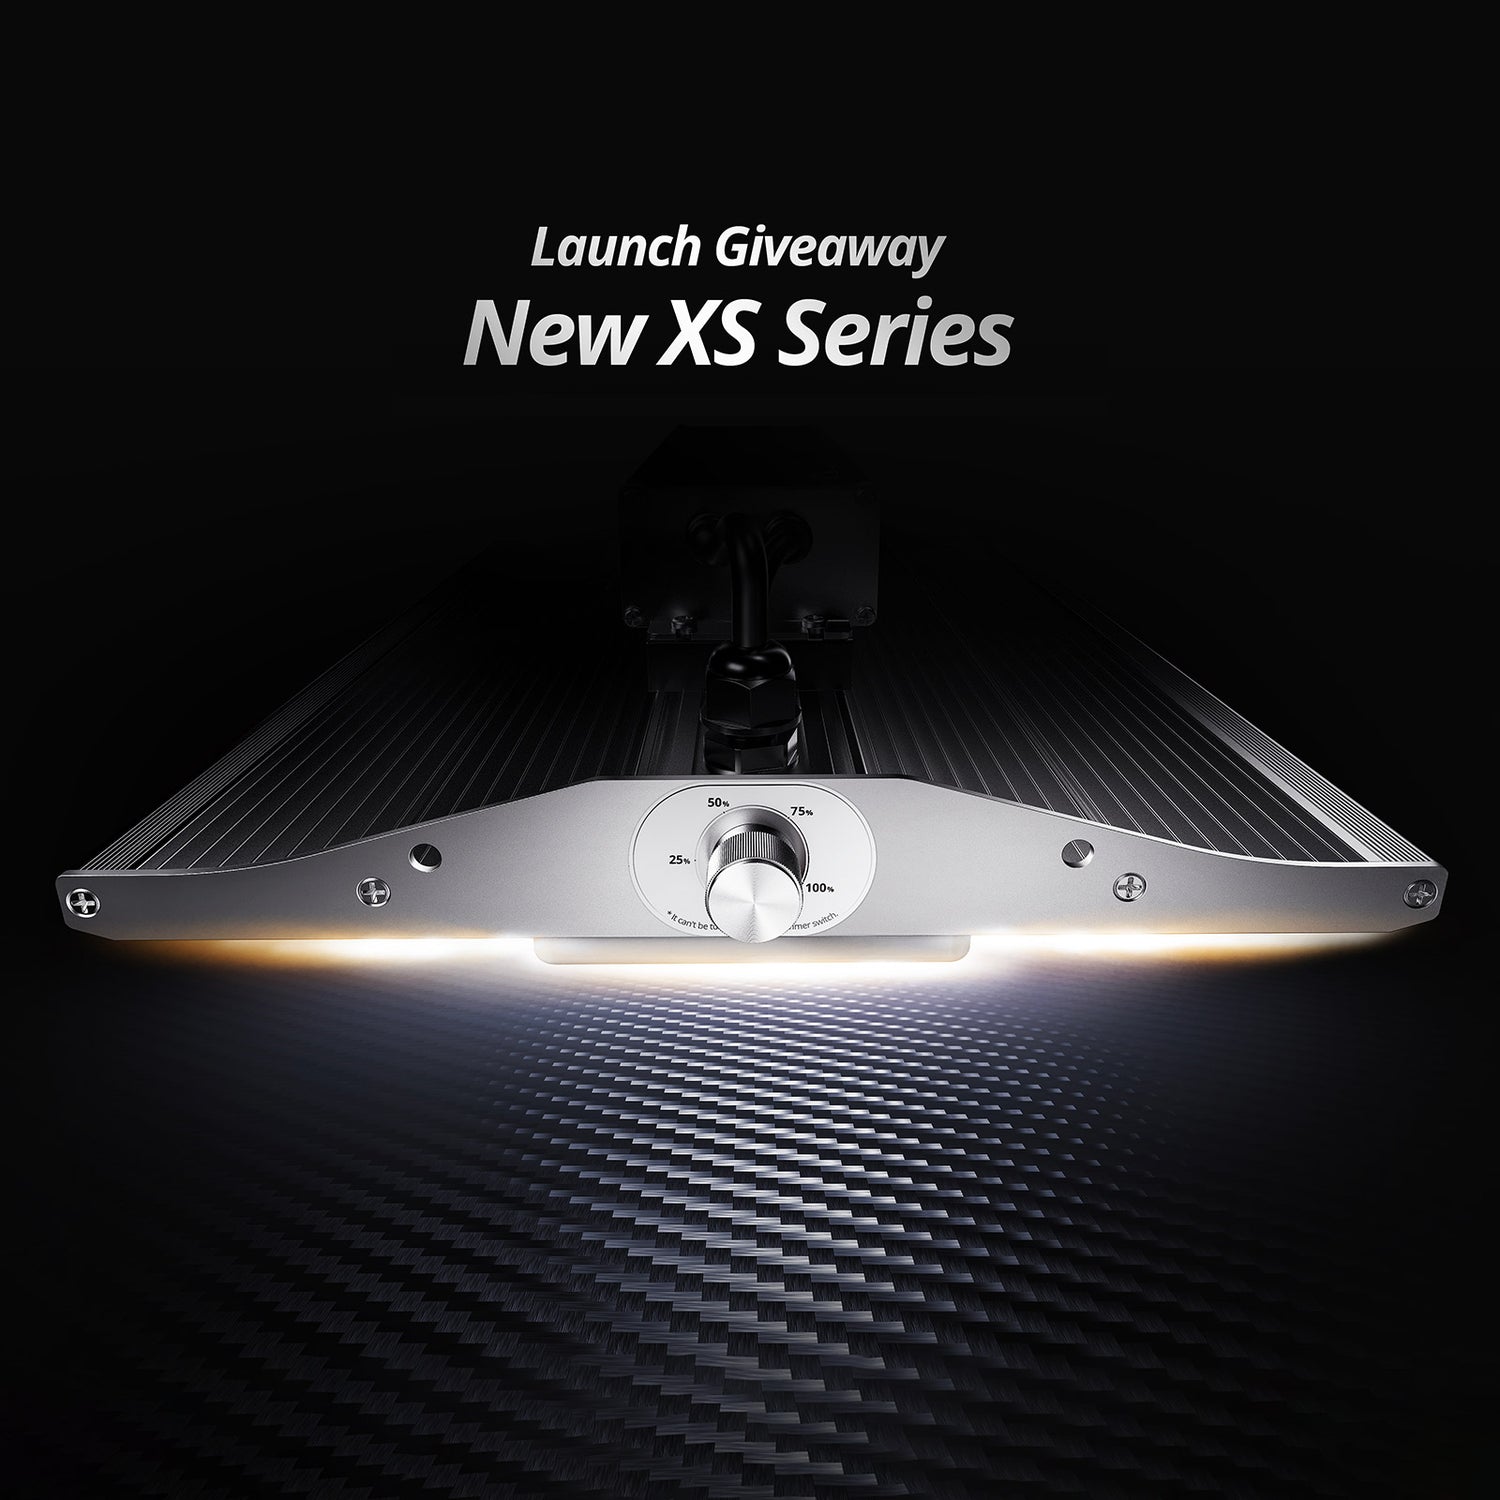 XS Series New Launch Giveaway on Facebook